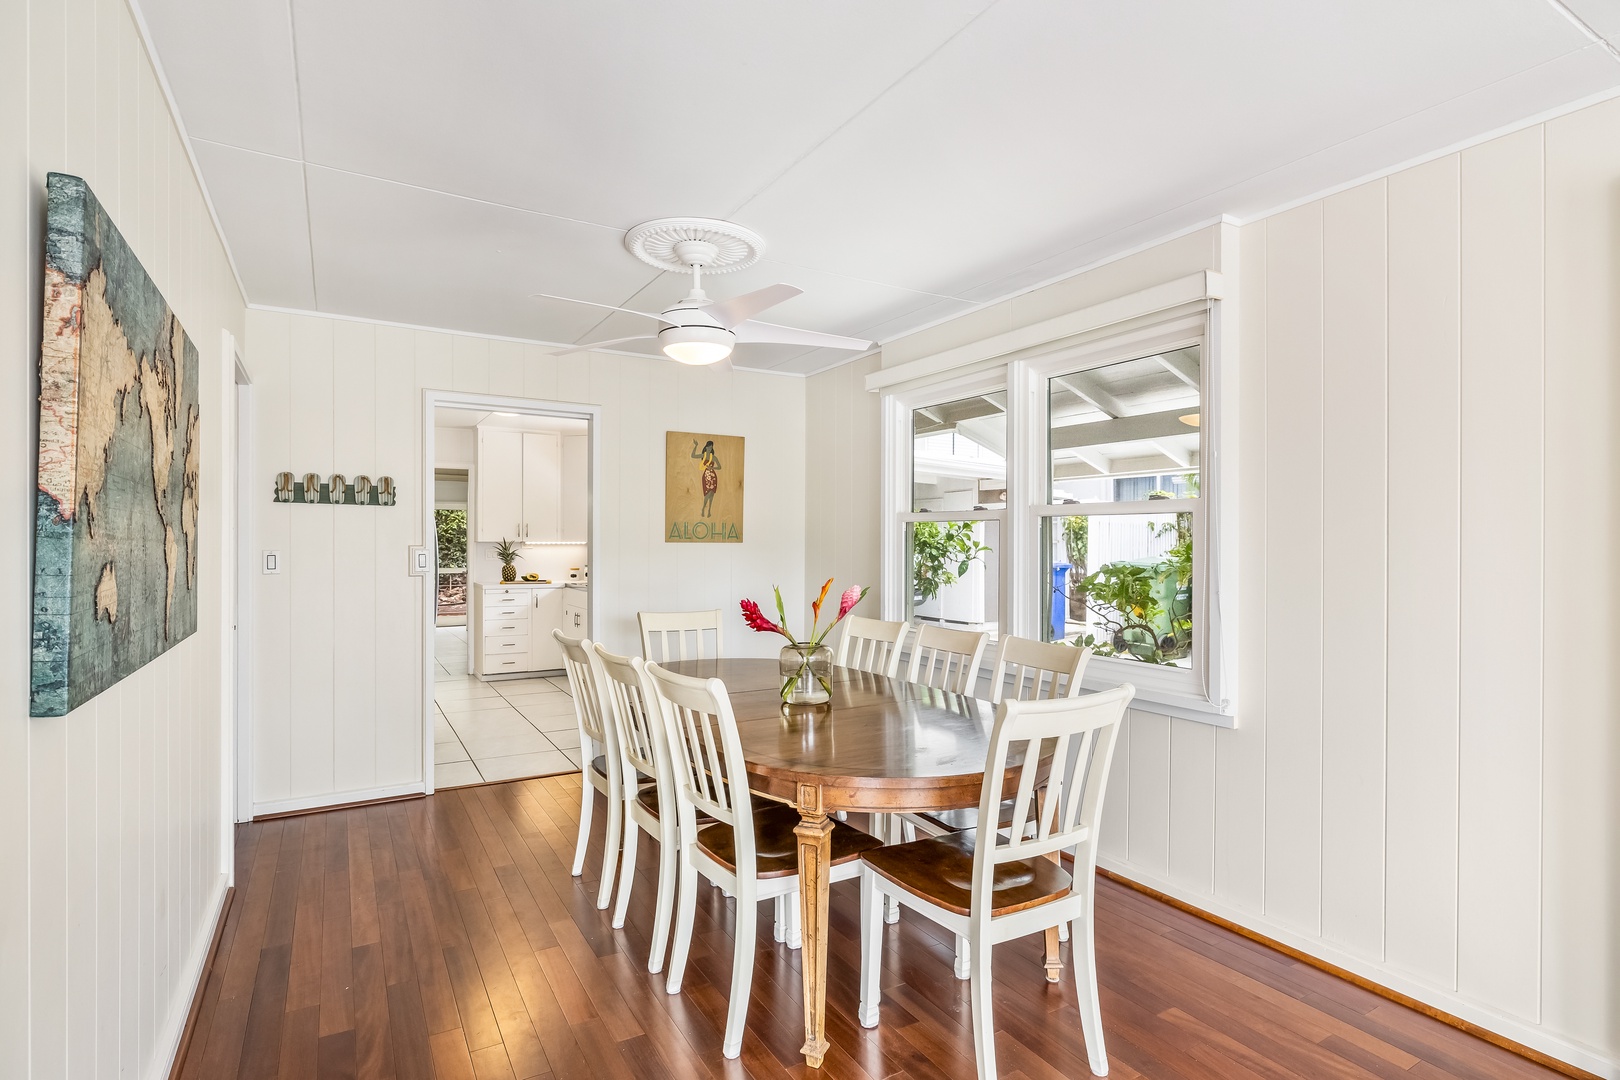 Honolulu Vacation Rentals, Kahala Cottage - The dining room has table for eight.